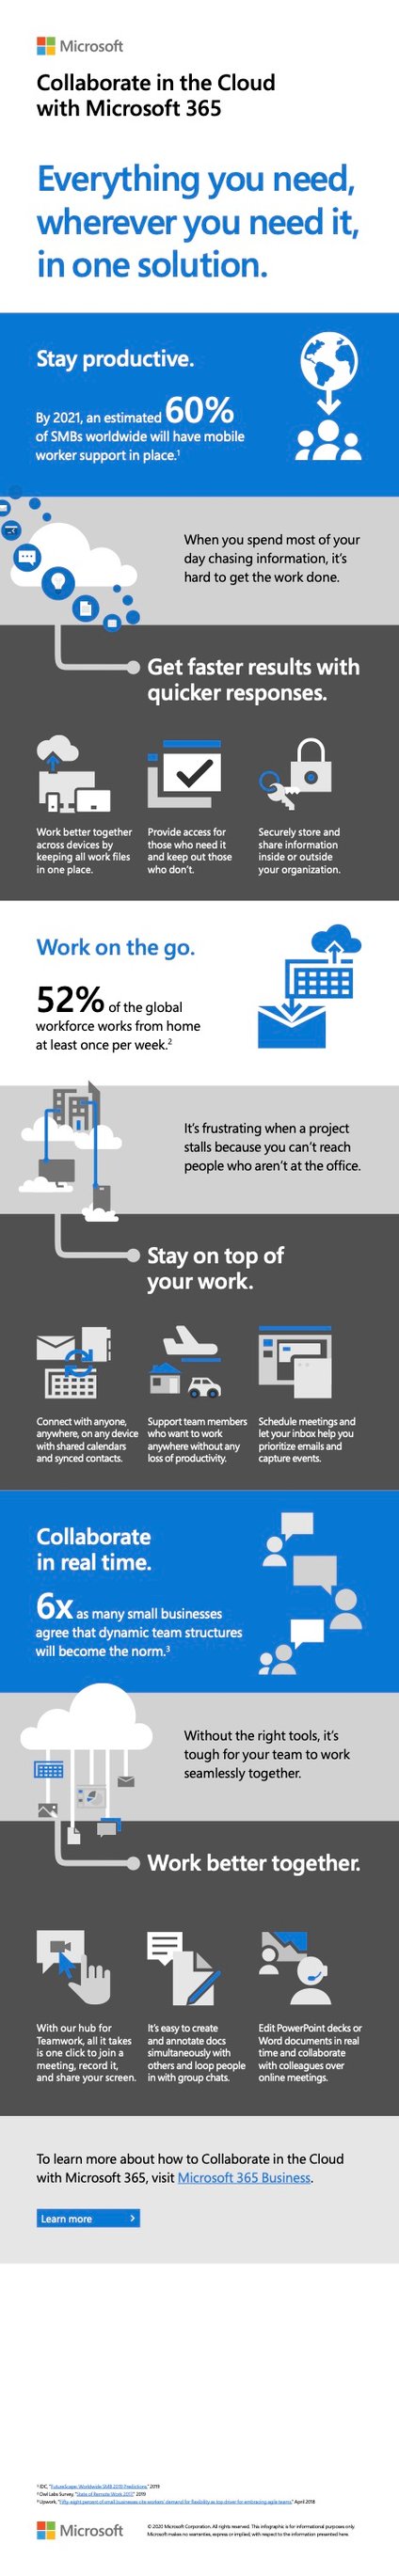 Infographic Collaborate in the Cloud with Microsoft 365